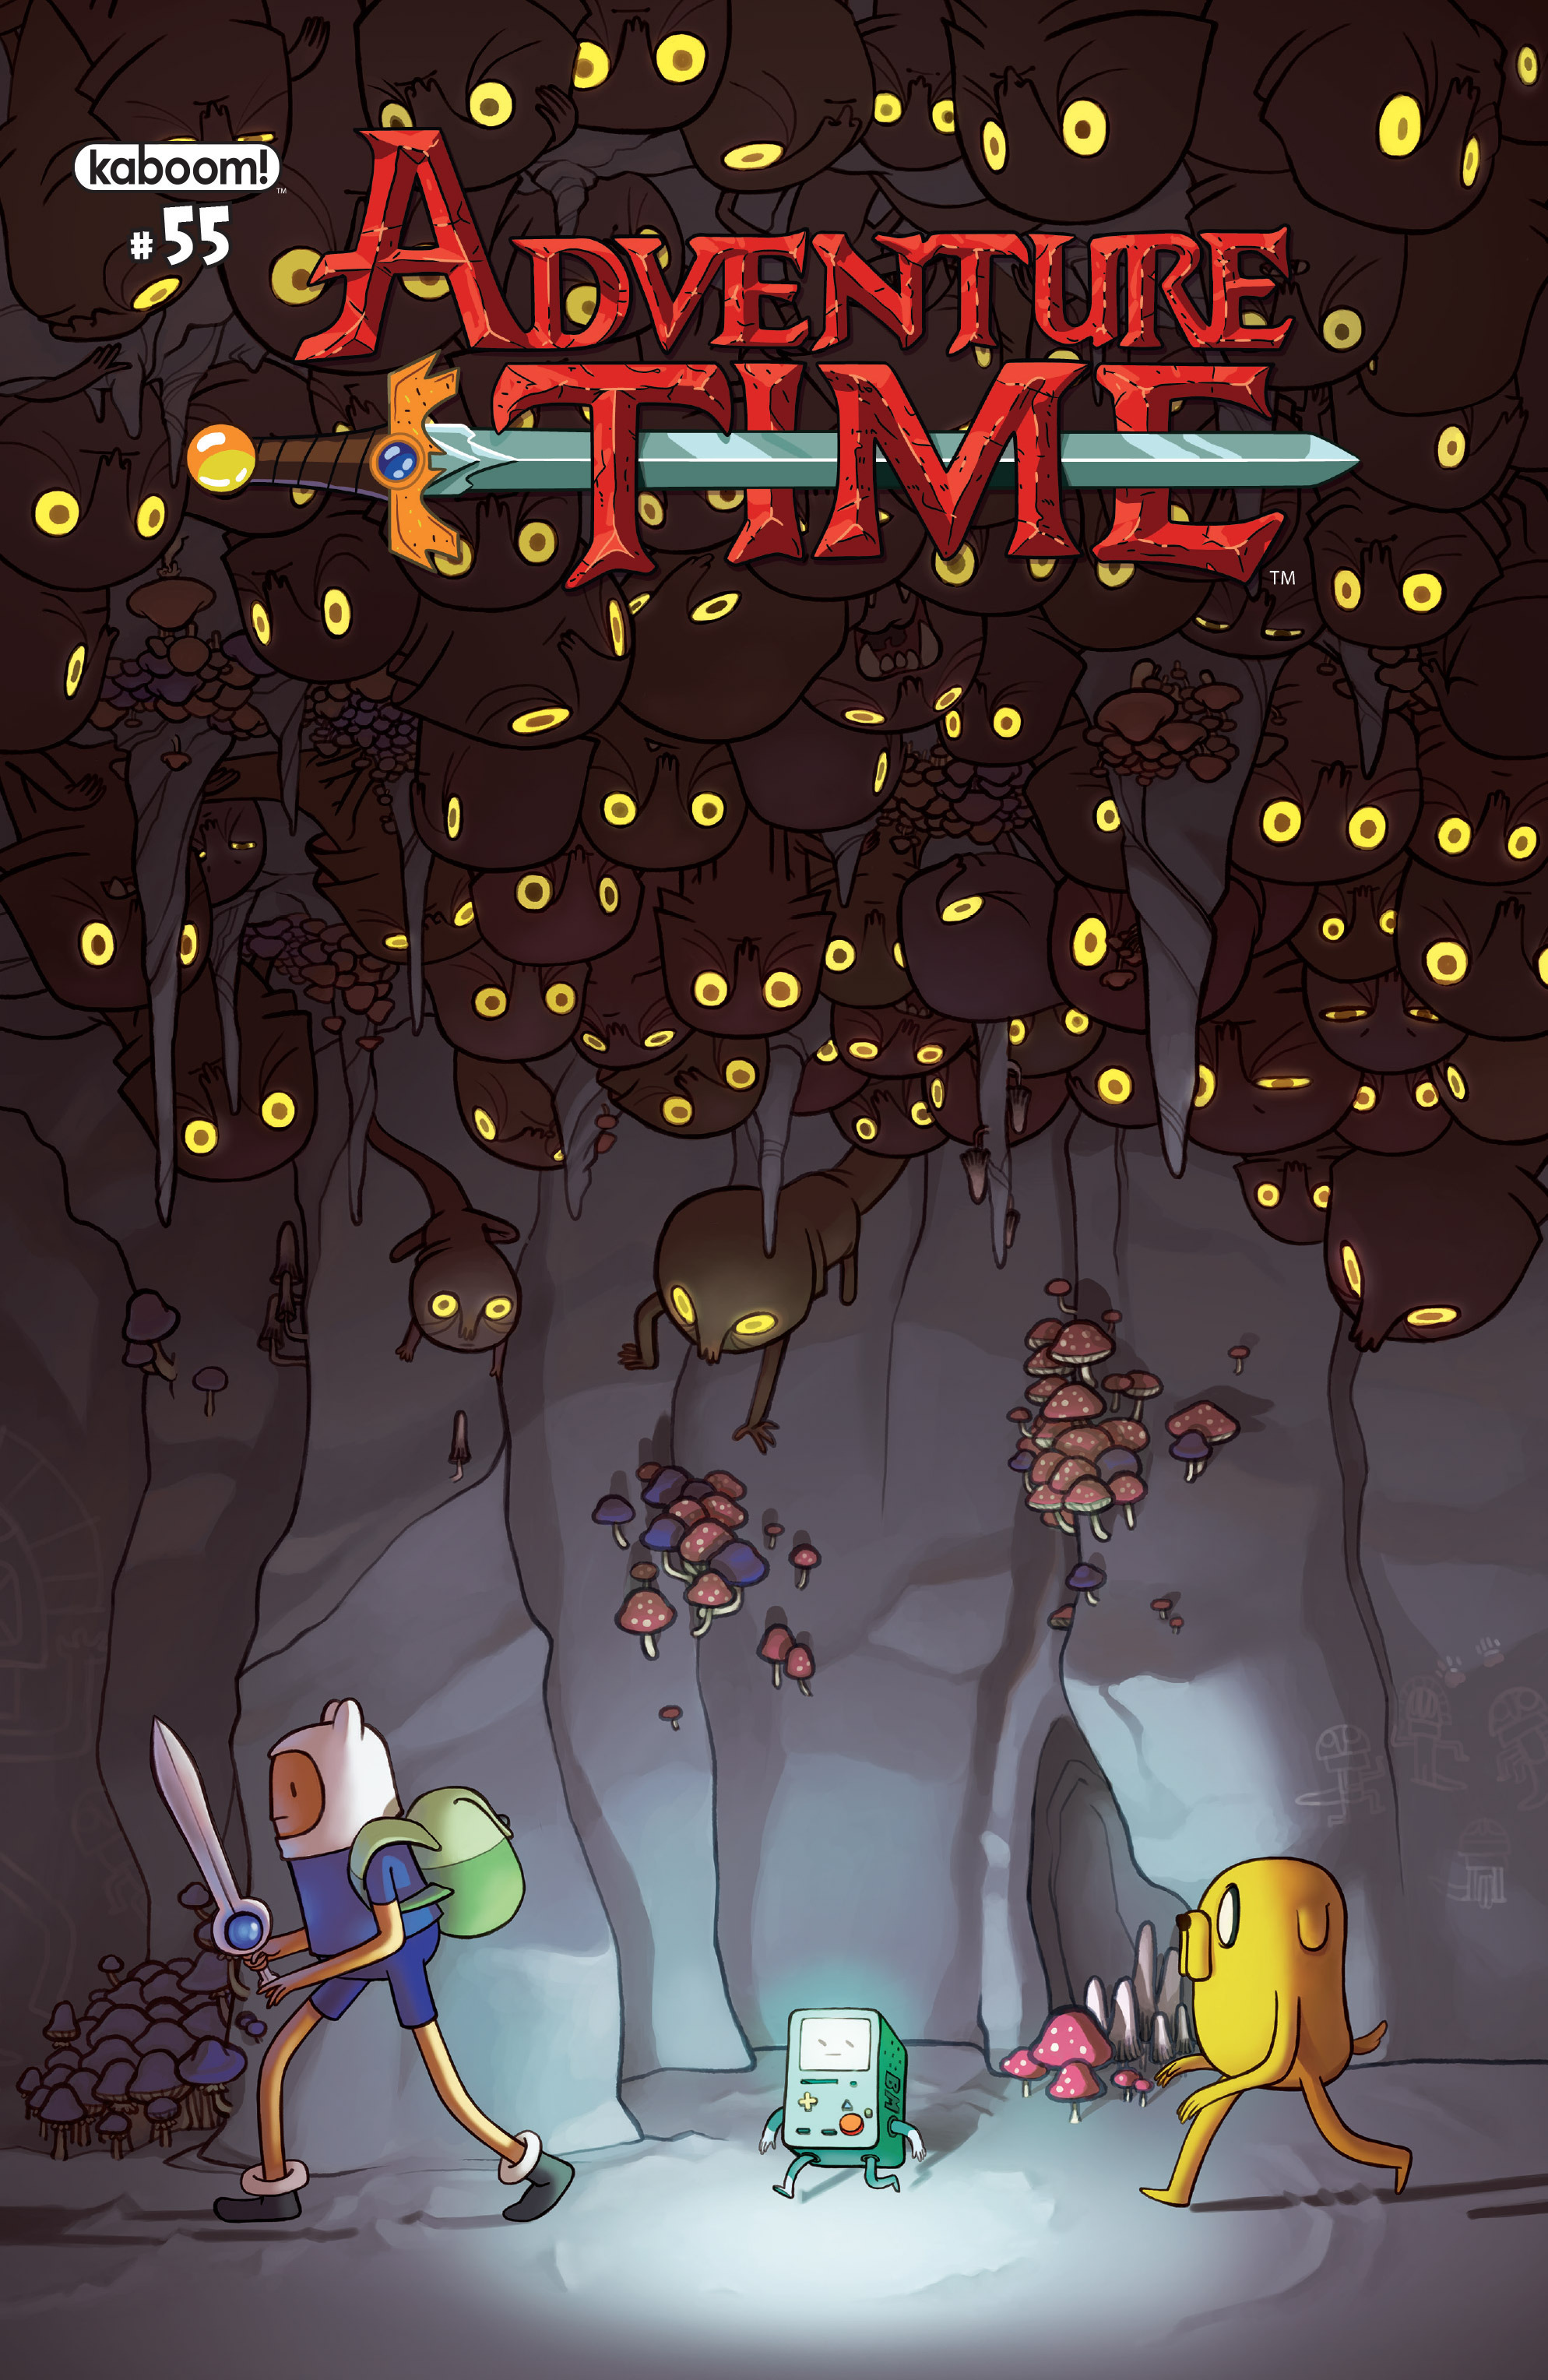 Read online Adventure Time comic -  Issue #55 - 1